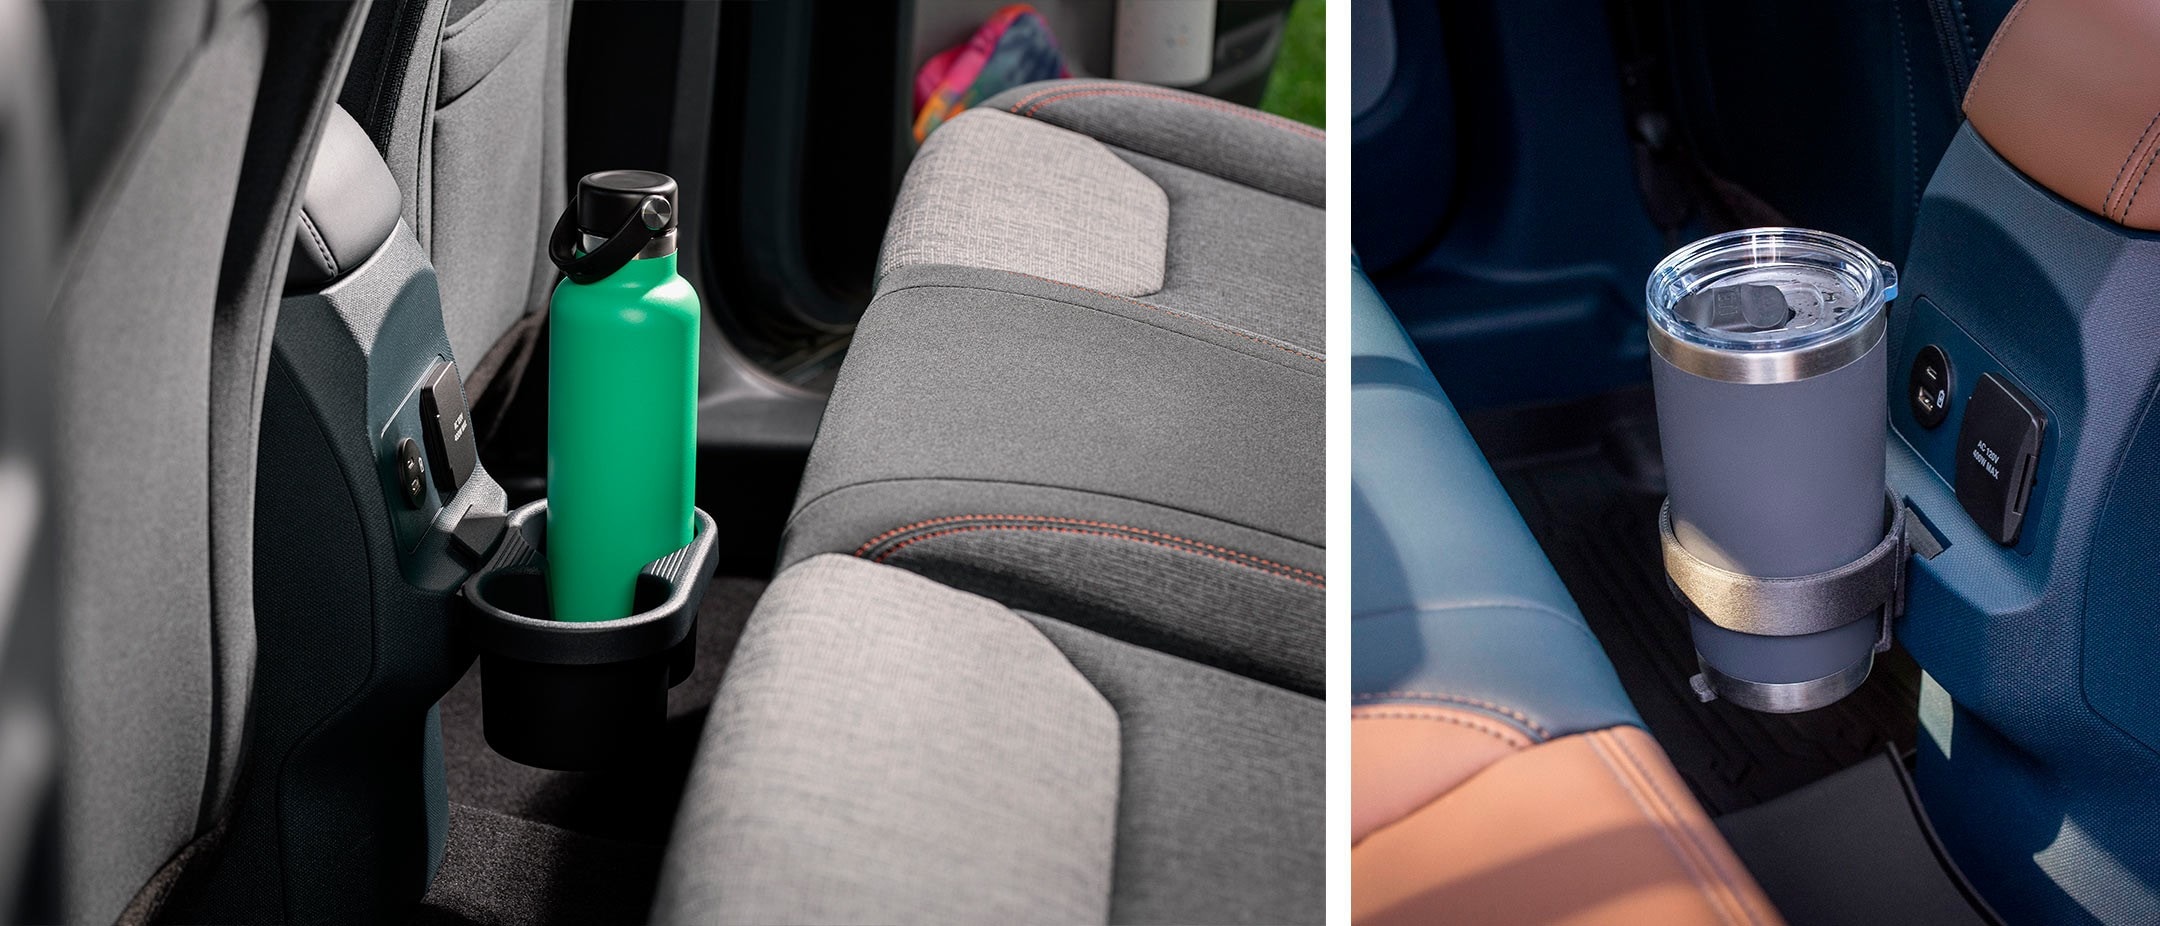 Ford is encouraging customers to 3D print their Fits-compatible accessories.  Image via Ford.